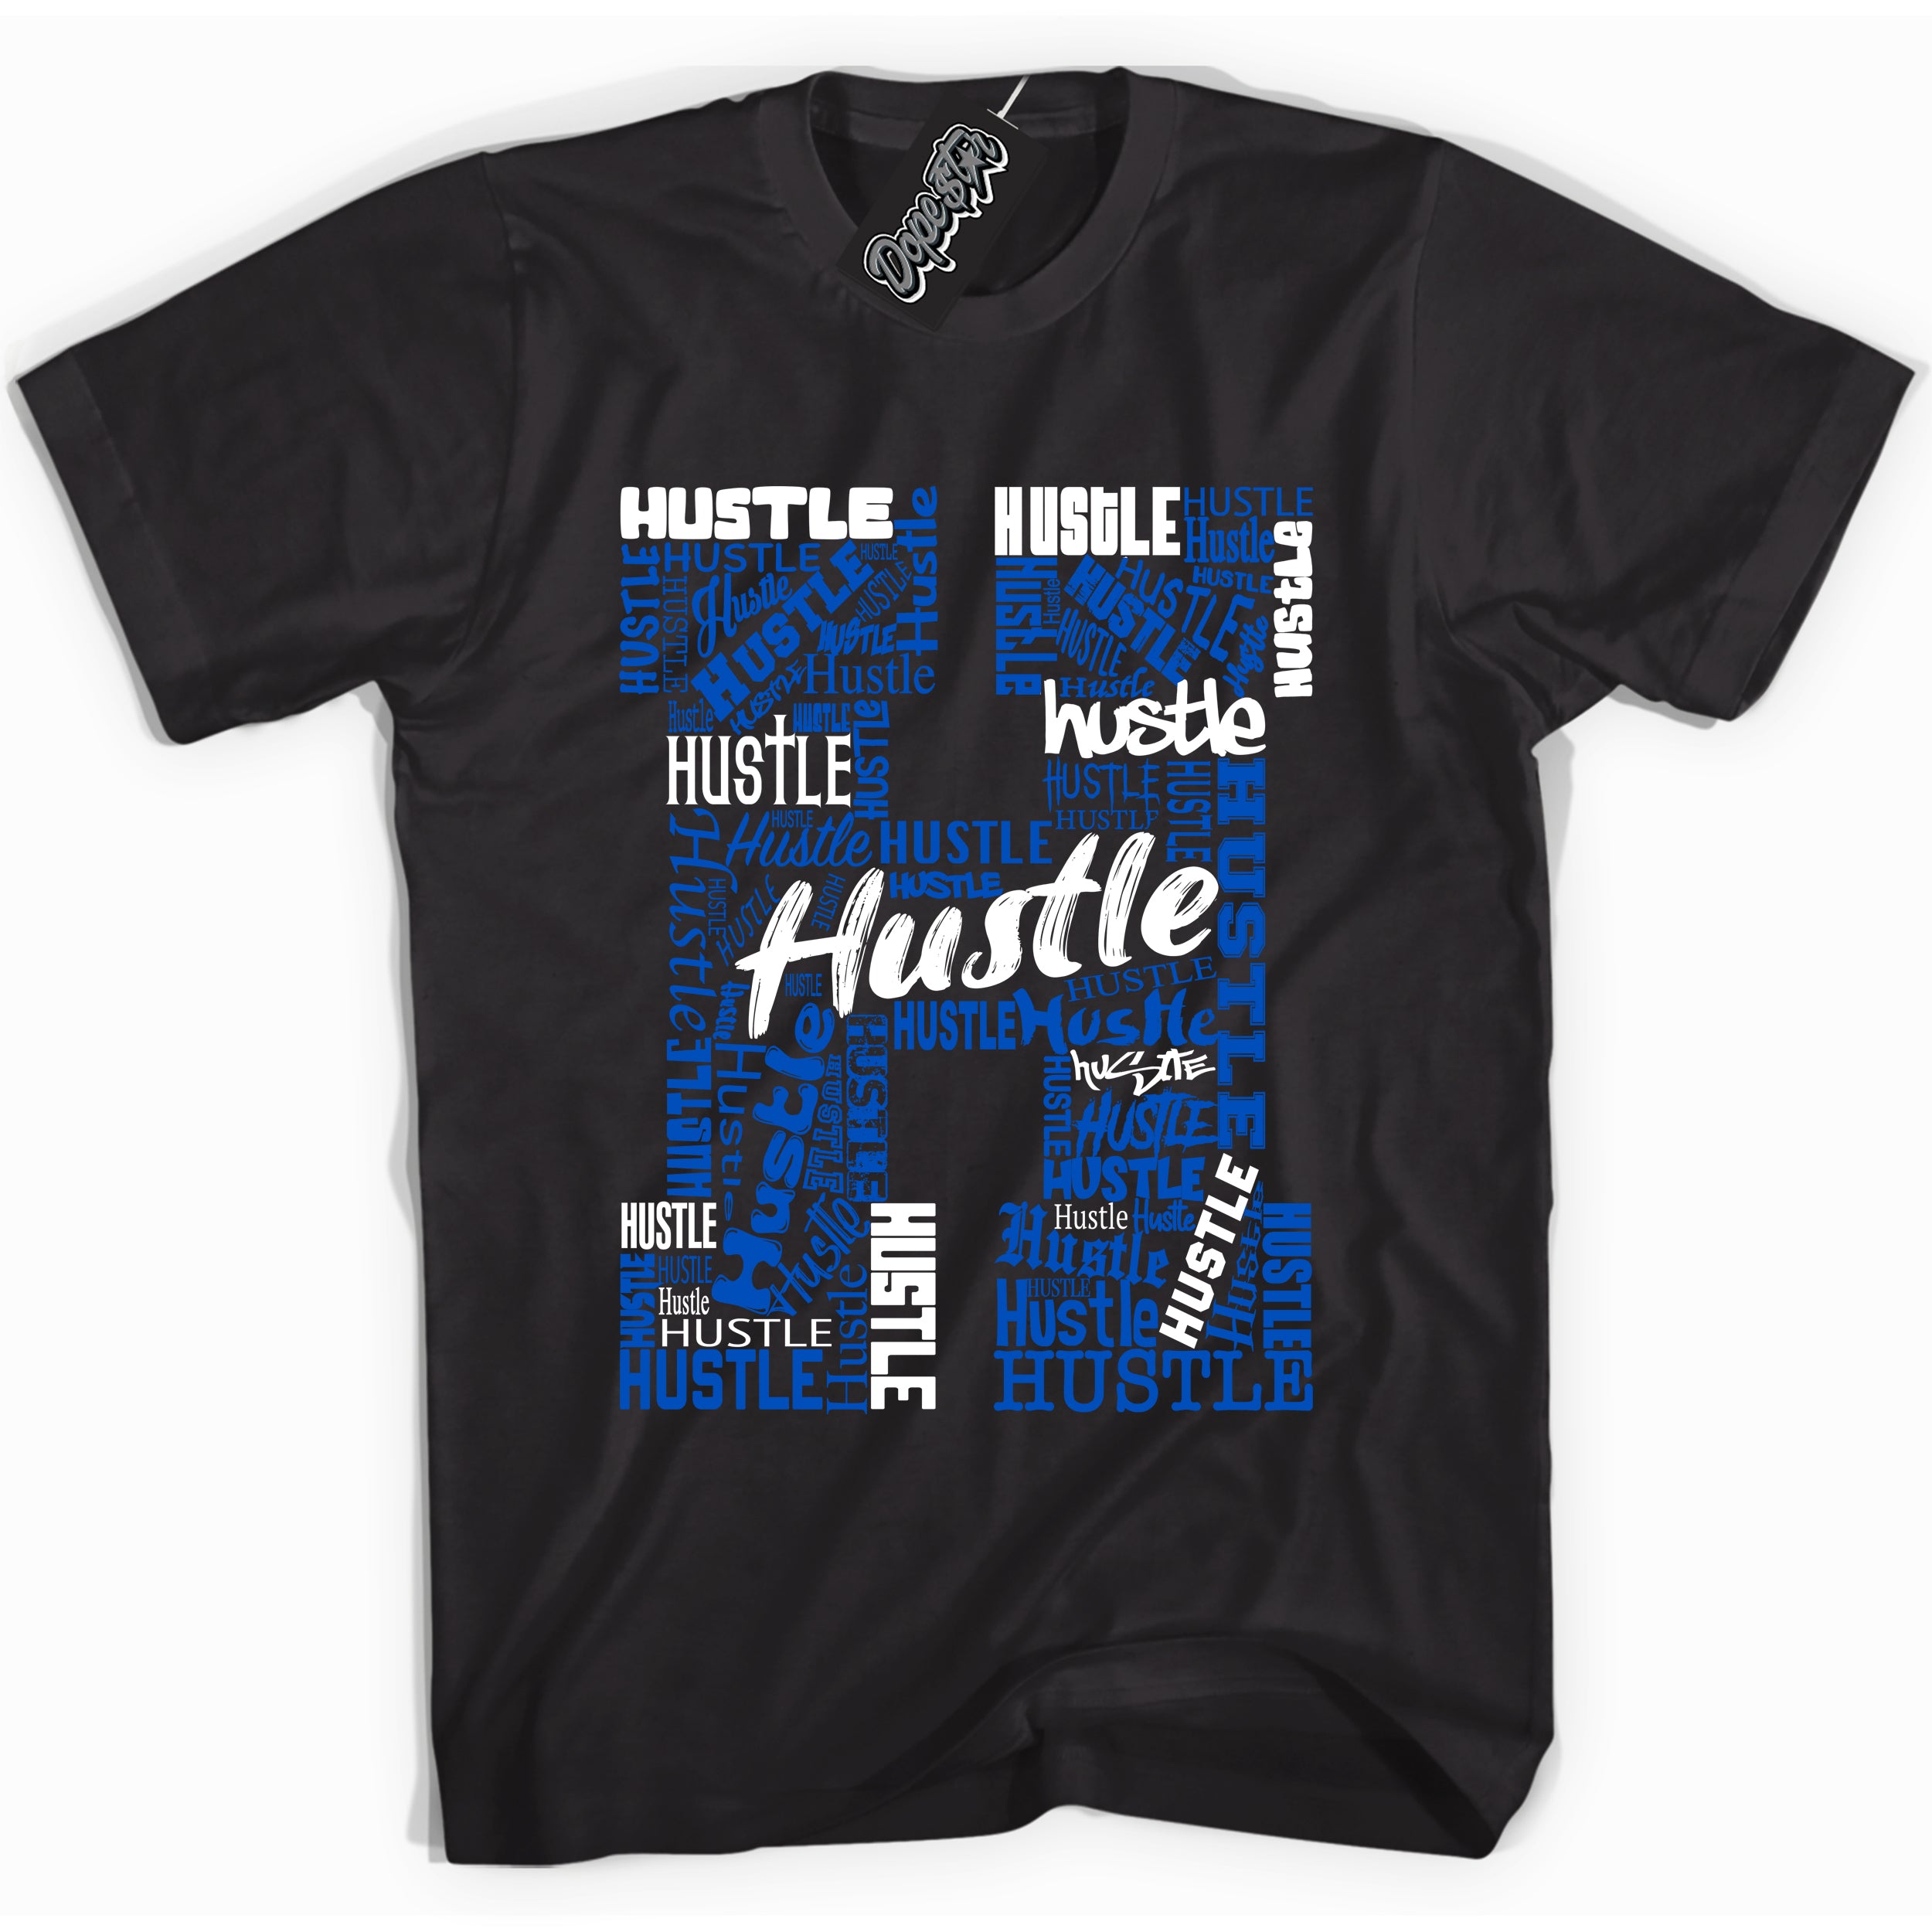 Cool White graphic tee with "Hustle" design, that perfectly matches Royal Reimagined 1s sneakers 